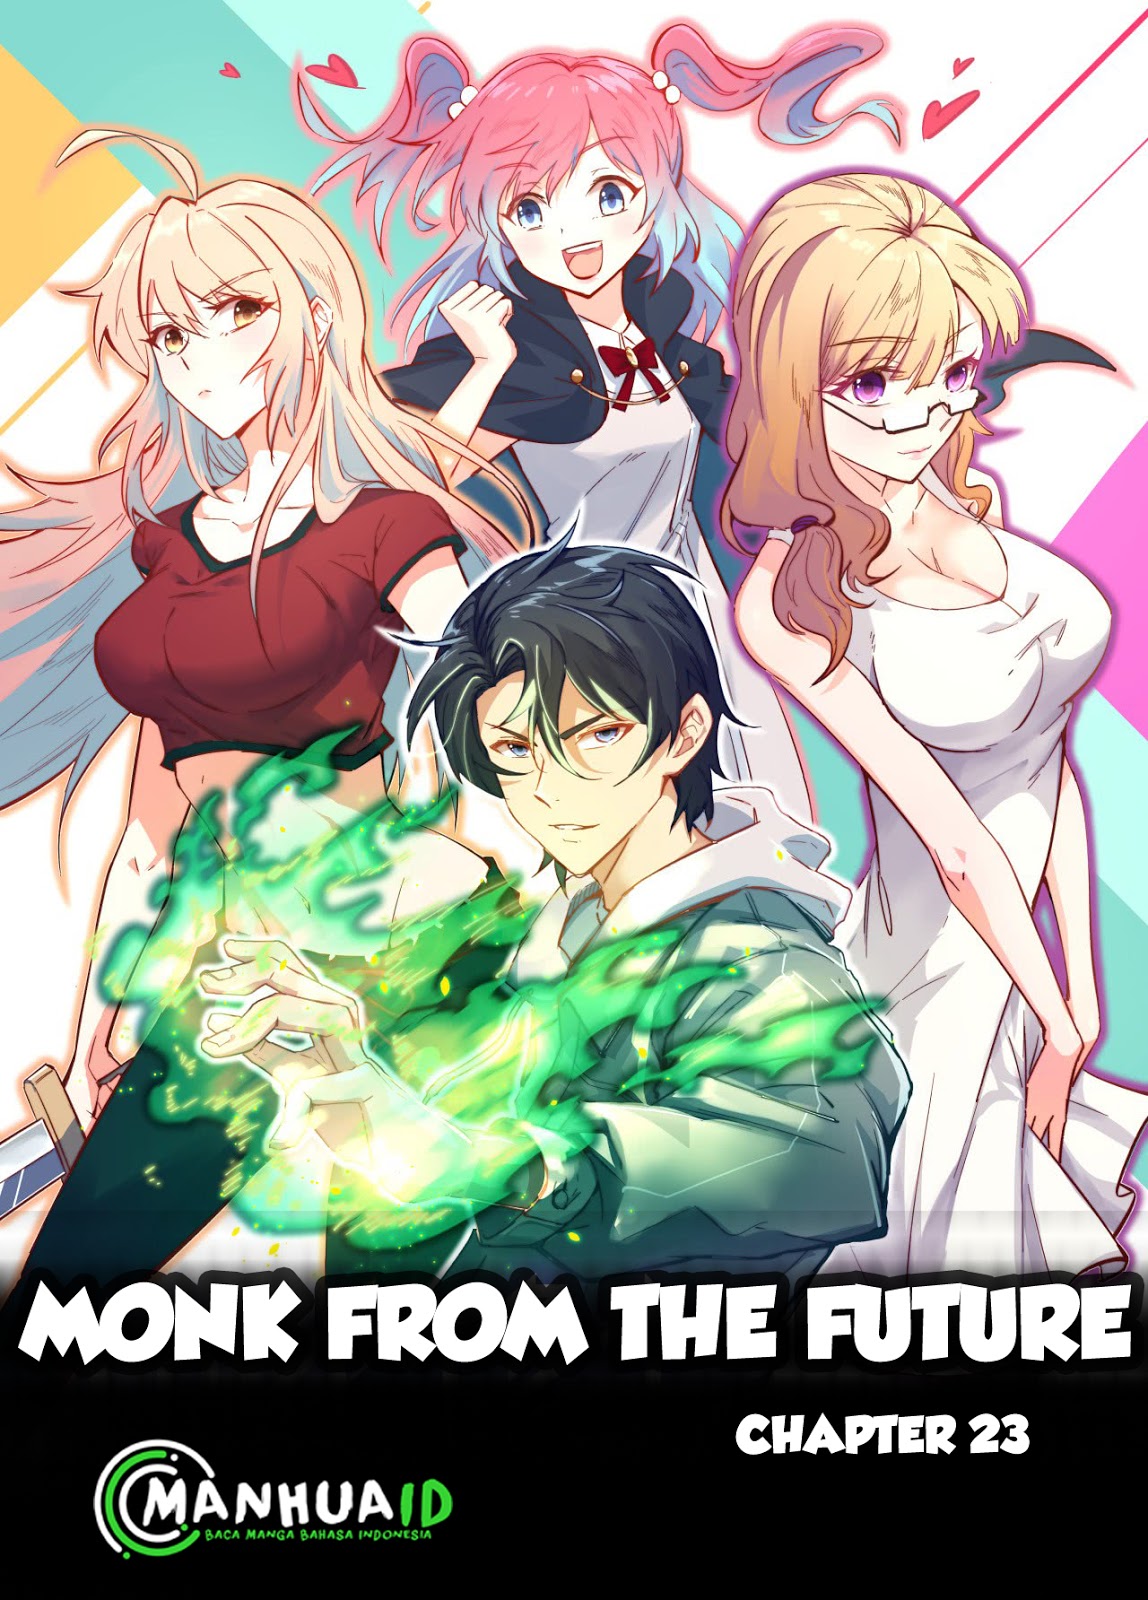 Monk From the Future Chapter 23